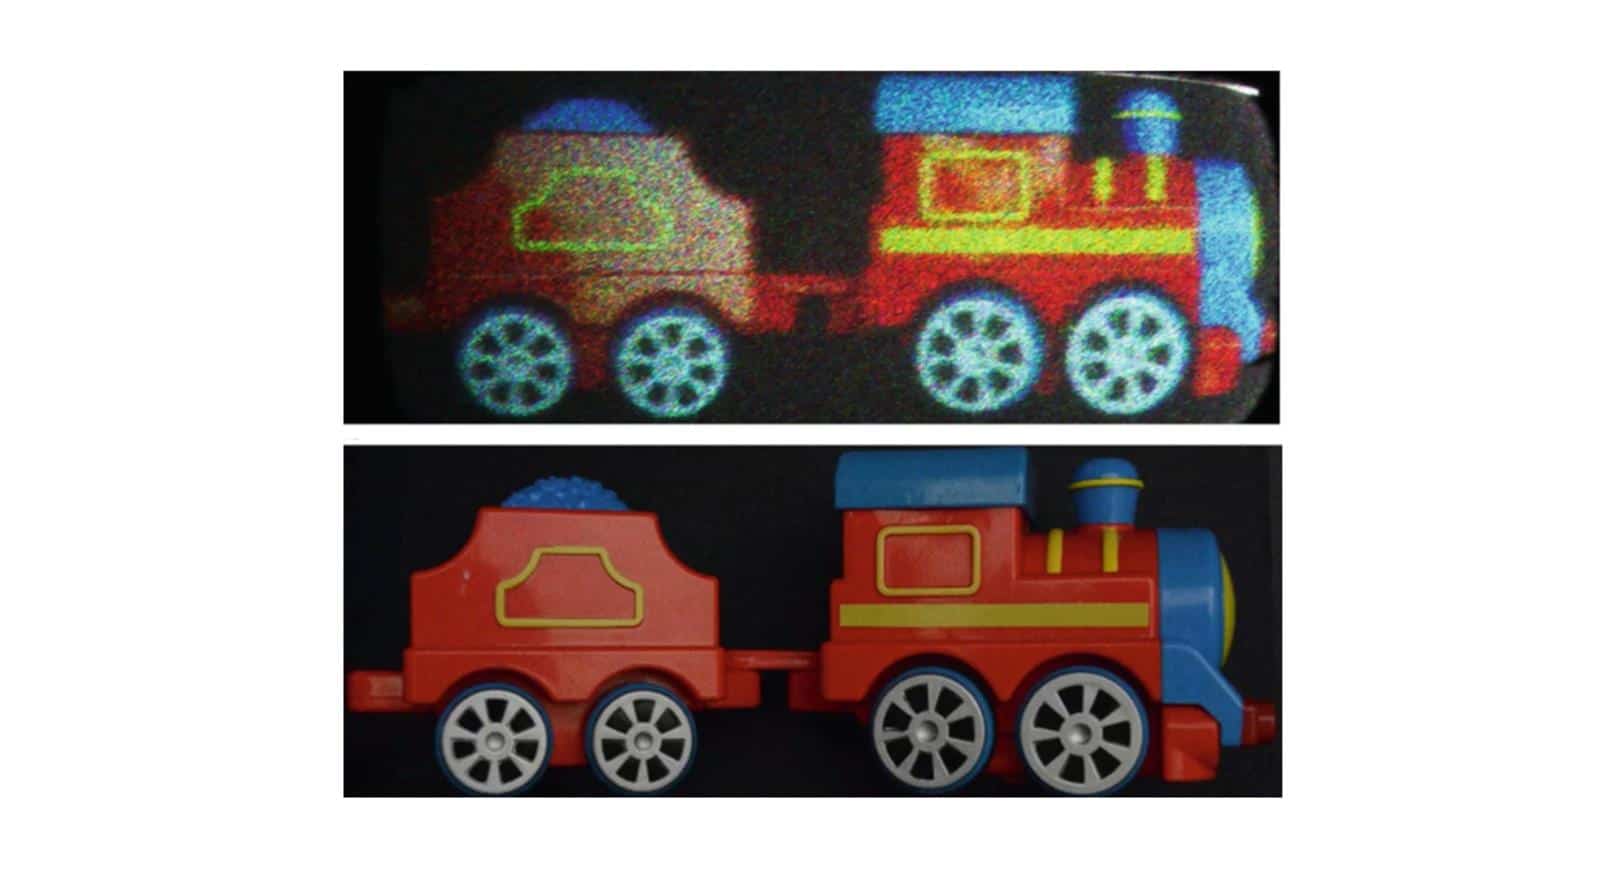 Big holograms within reach of holobricks?  Disney scientists are working on this device